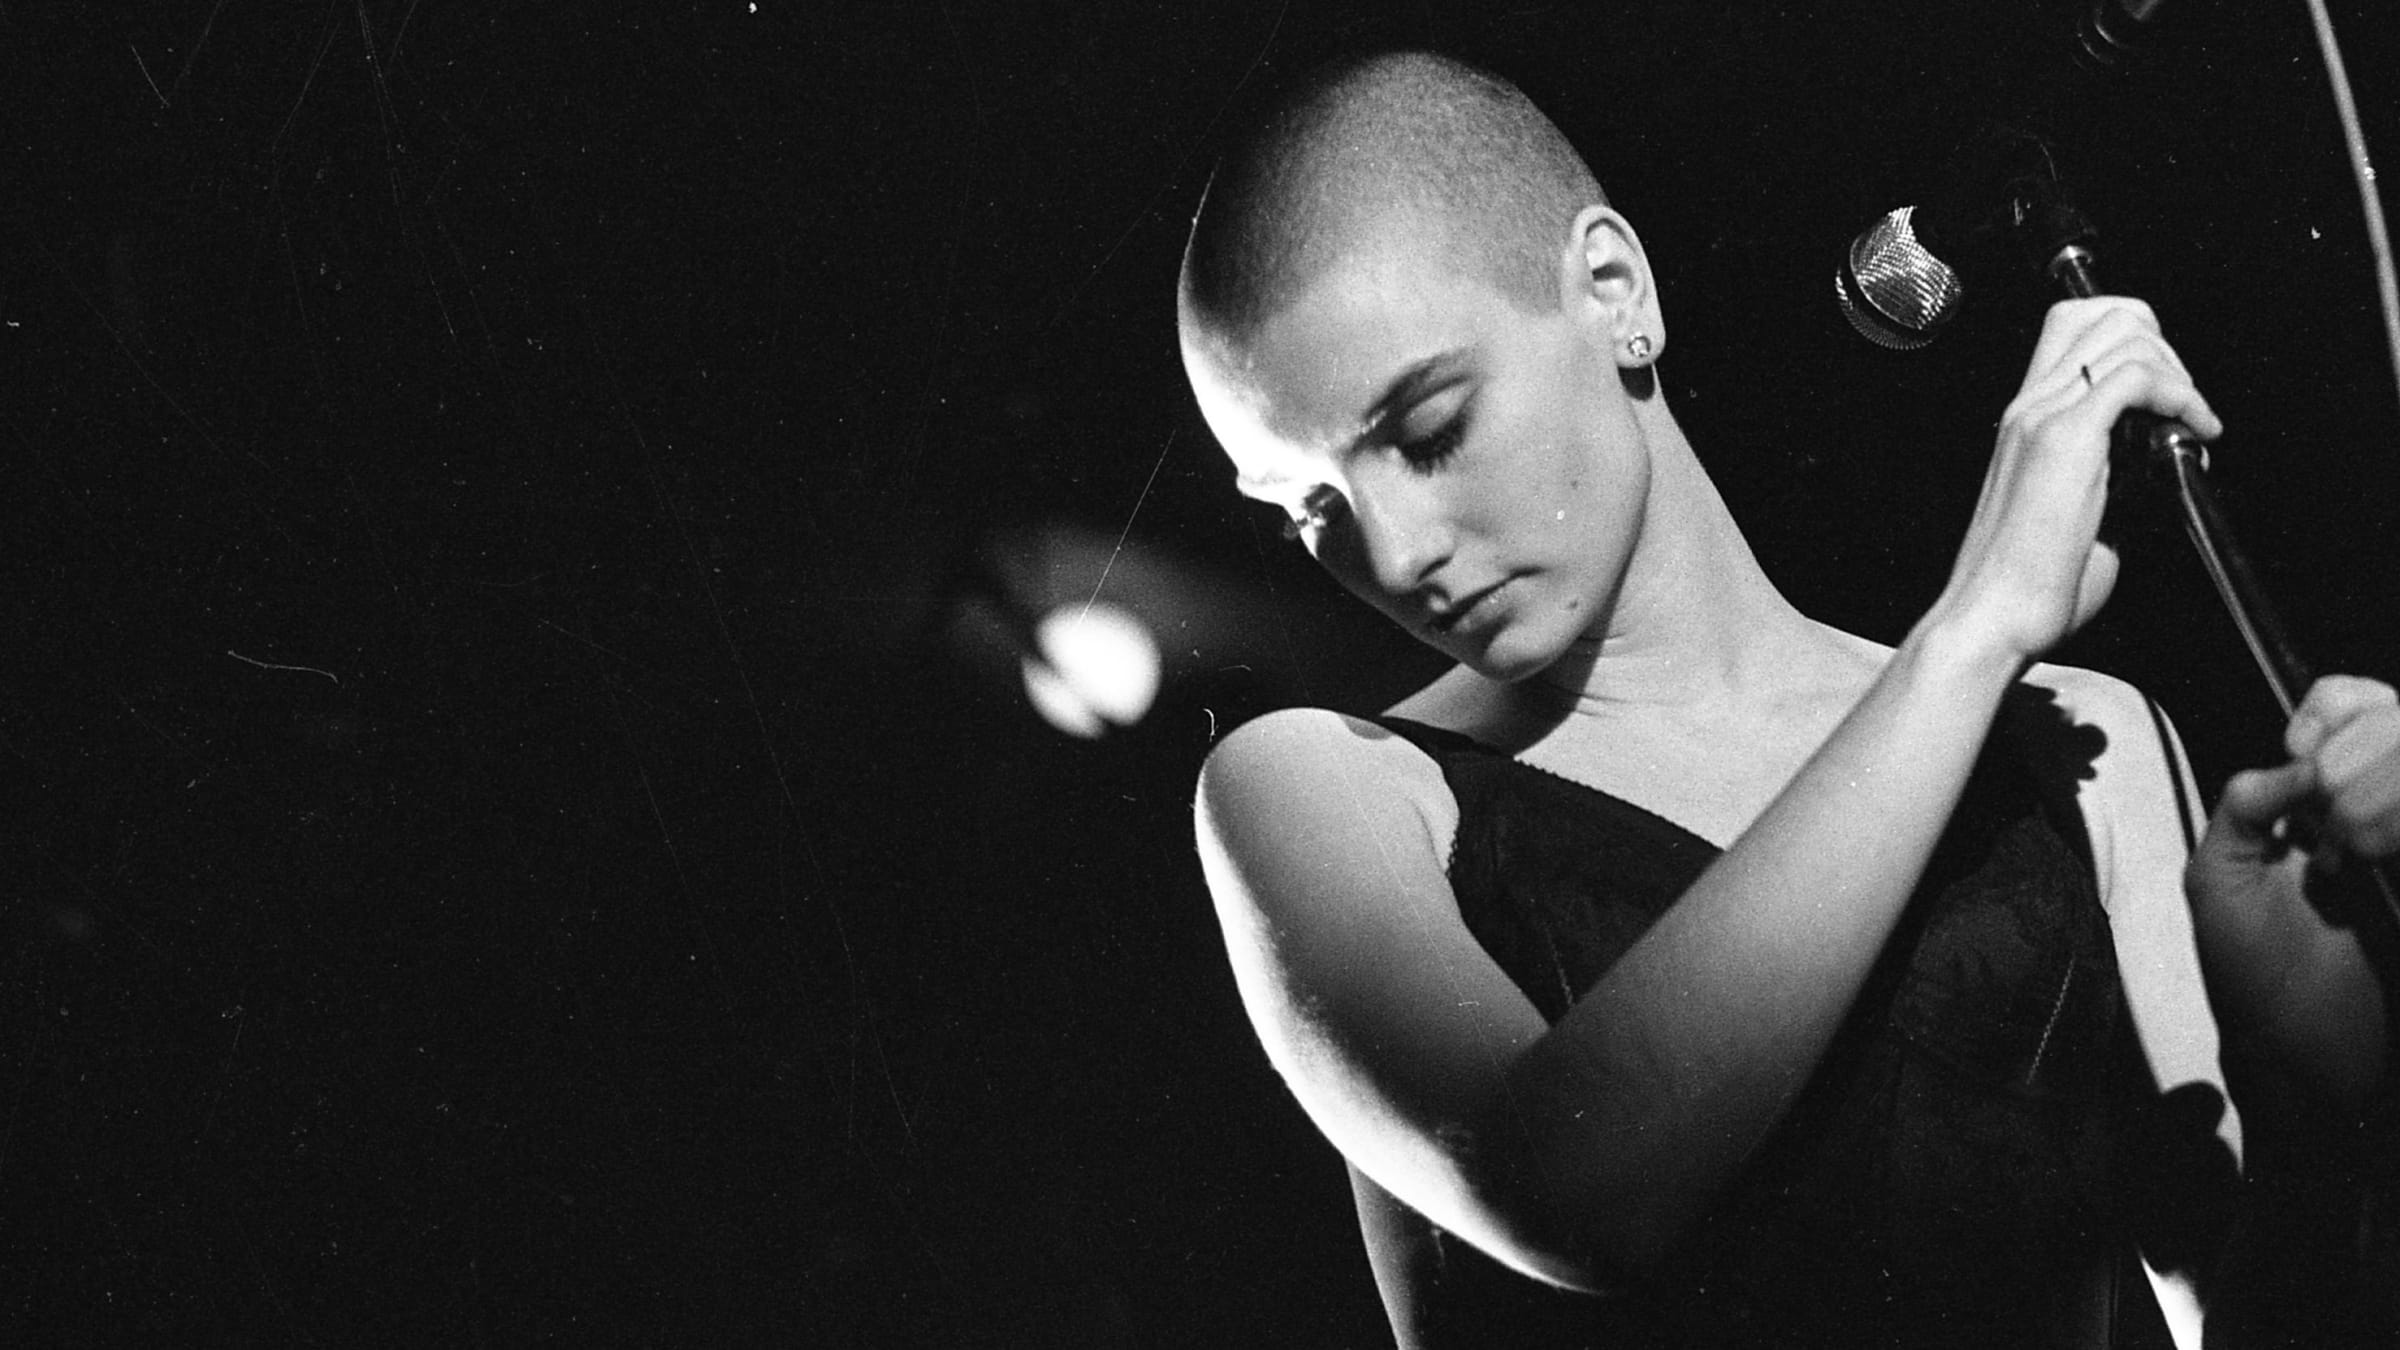 Sinead O'Connor on stage at the Olympic Ballroom in 1988.